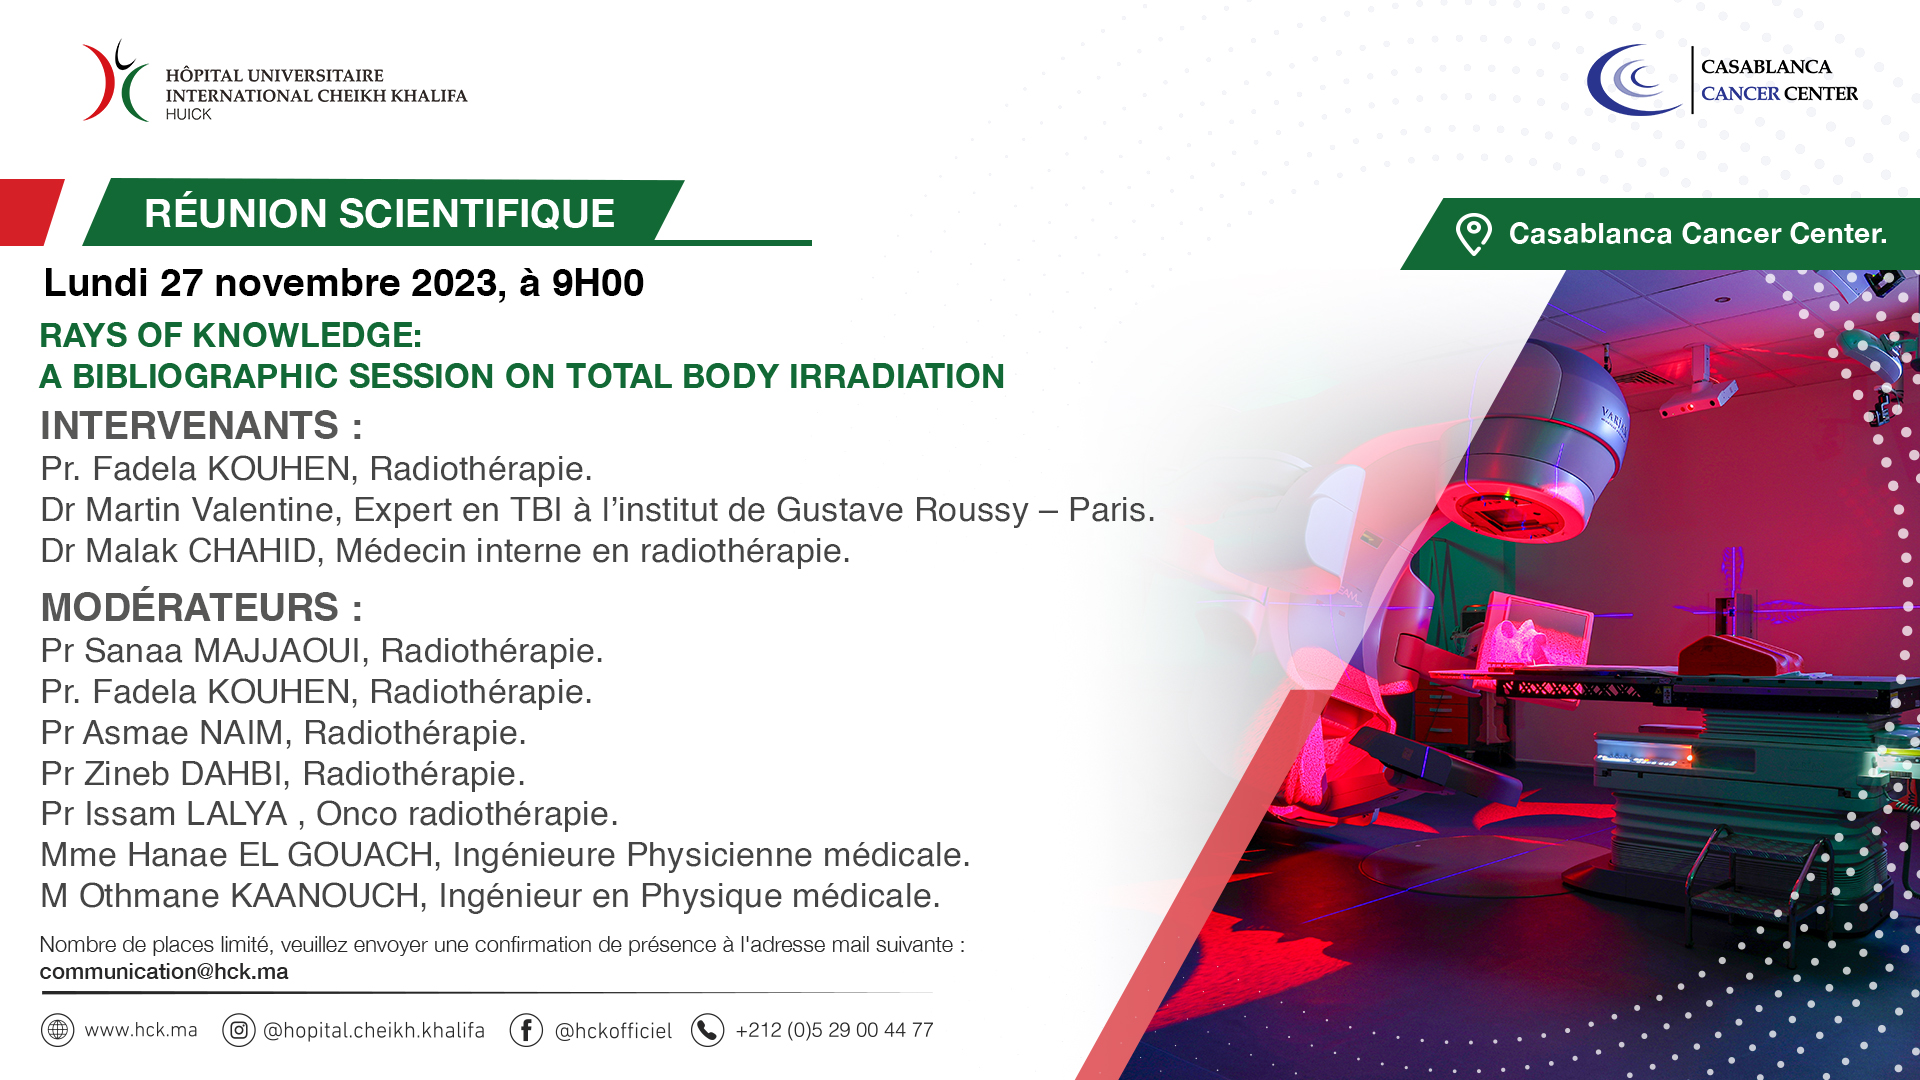 RÉUNION SCIENTIFIQUE - RAYS OF KNOWLEDGE: A BIBLIOGRAPHIC SESSION ON TOTAL BODY IRRADIATION